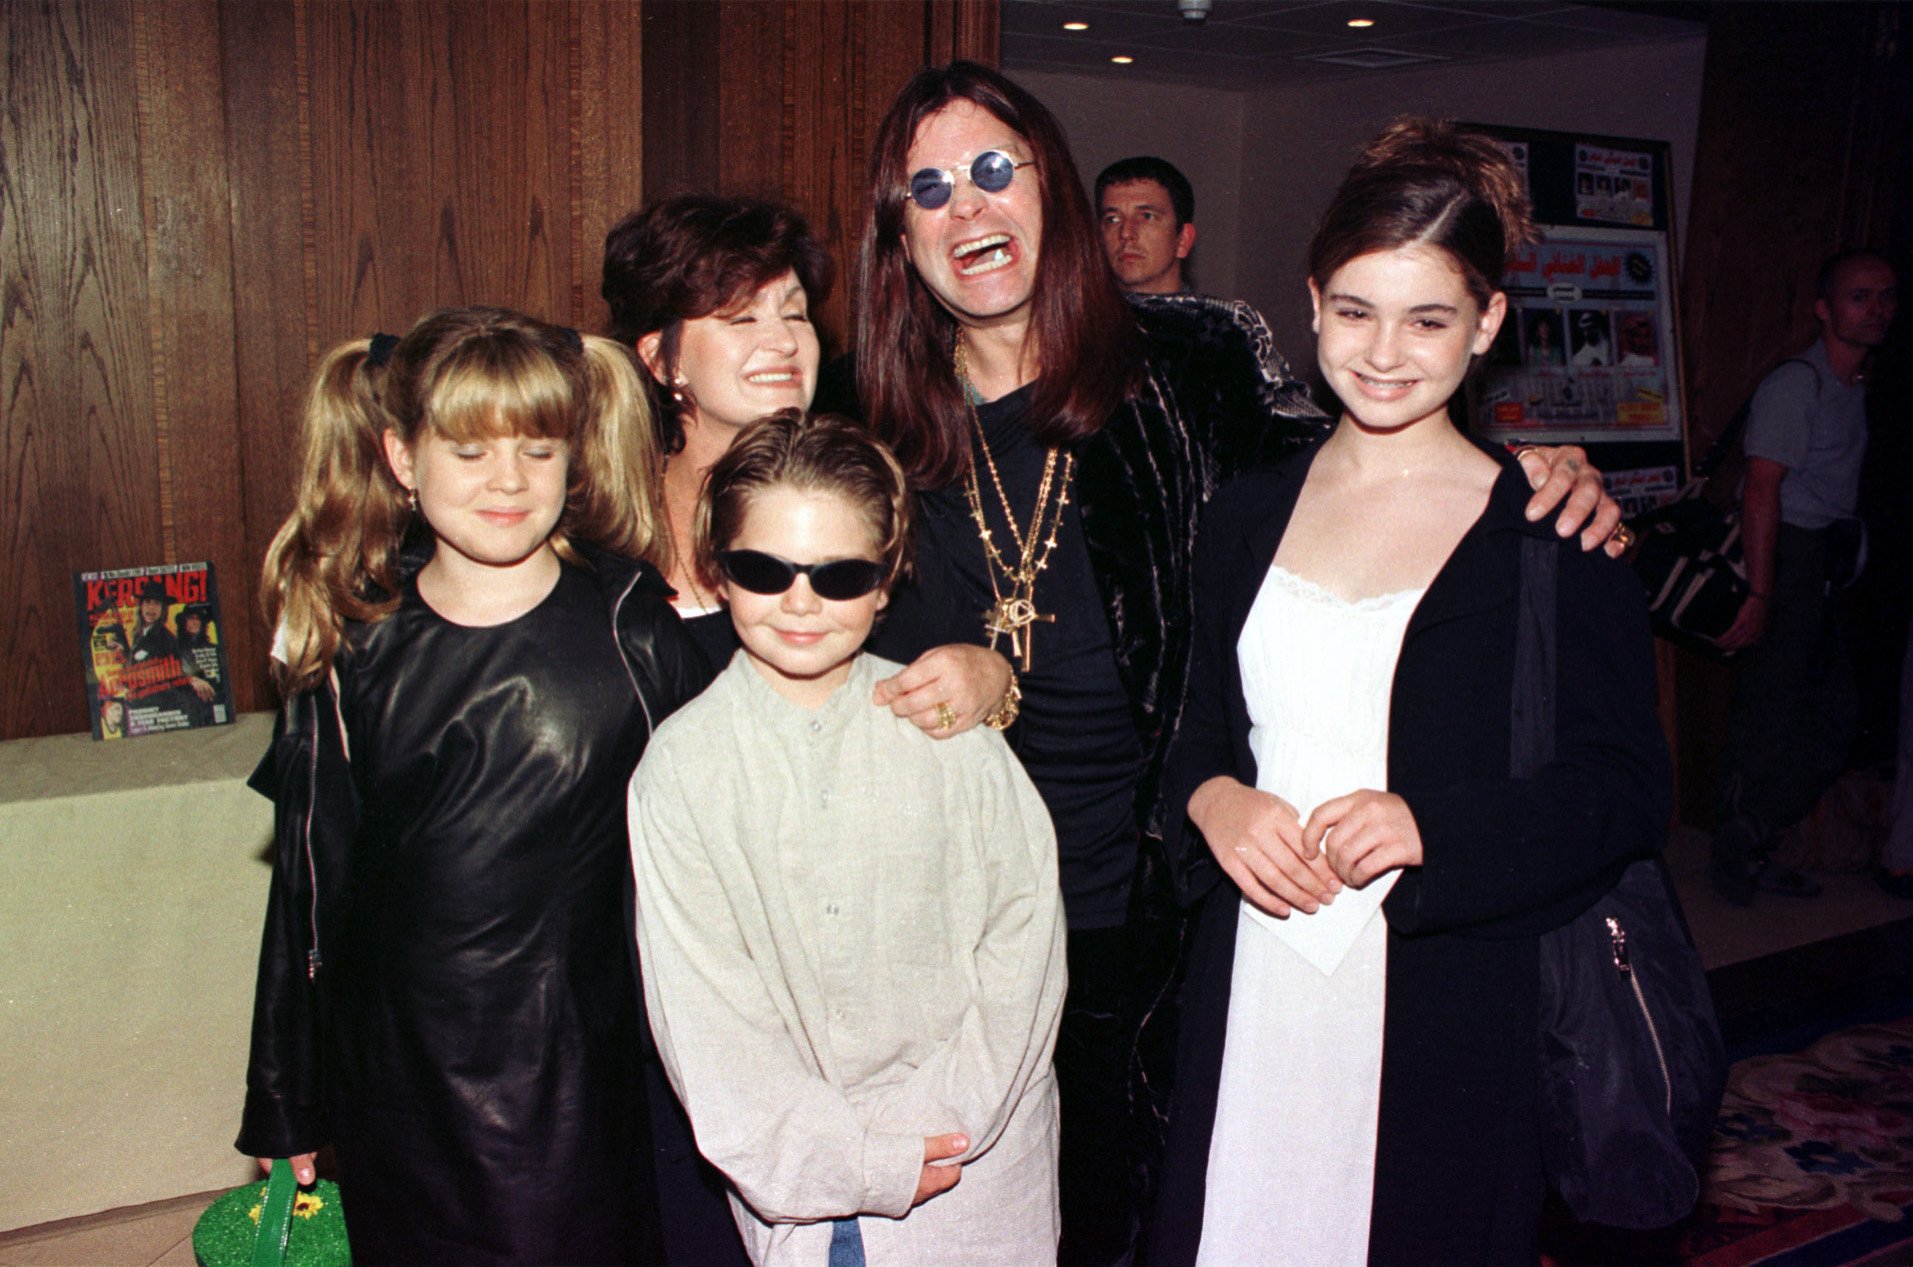 Ozzy Osbourne, Sharon Osbourne and their children Kelly, Jack and Aimee at the Kerrang Awards 1997 in London. | Source: Getty Images